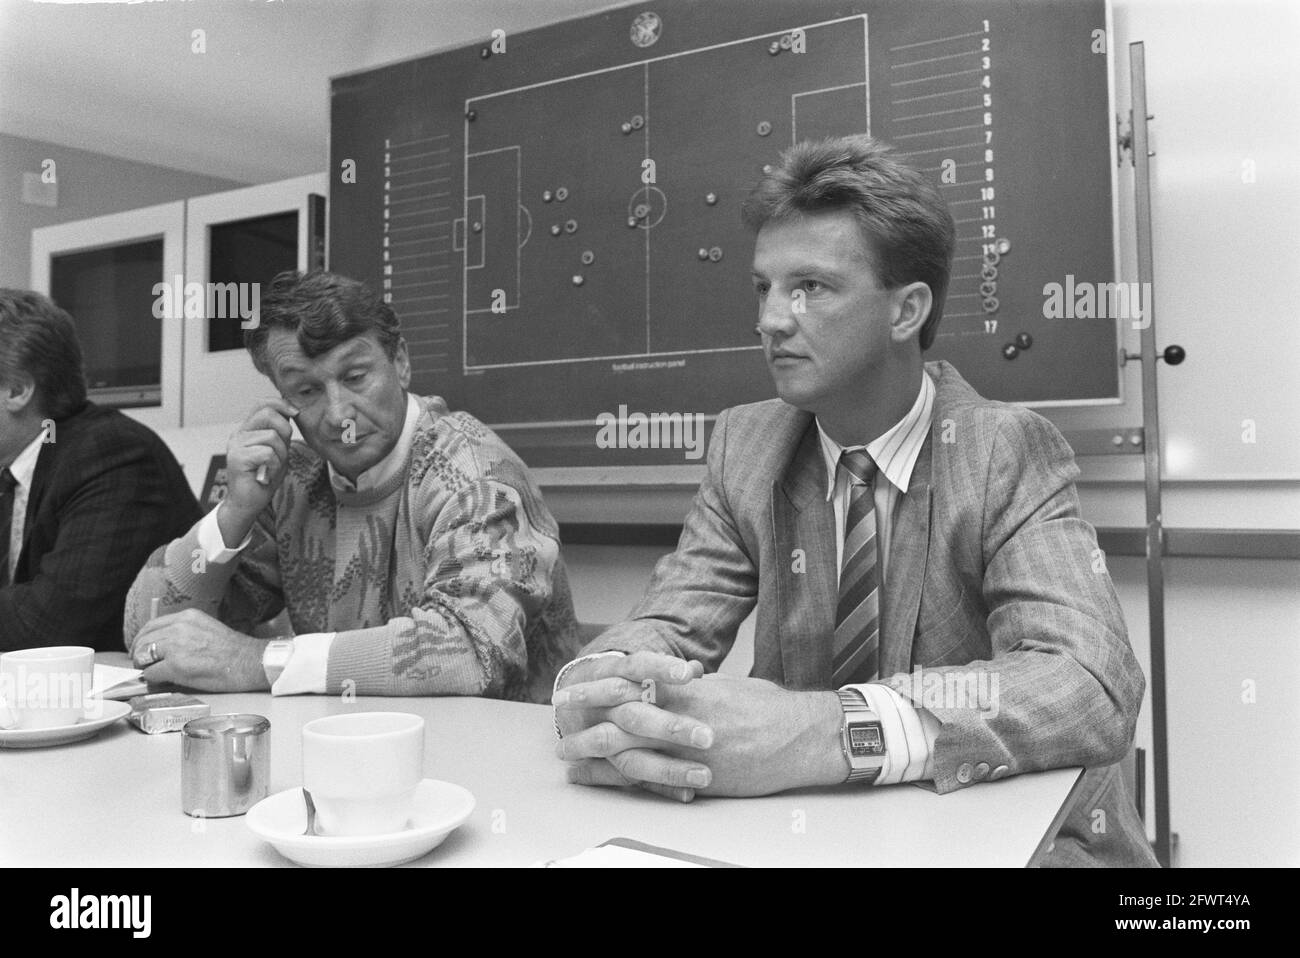 New trainers Ajax after departure Linder; from left to right director Arie van Eijden, Spitz Kohn and Louis van Gaal, September 22, 1988, TRAINERS, directors, sports, soccer, The Netherlands, 20th century press agency photo, news to remember, documentary, historic photography 1945-1990, visual stories, human history of the Twentieth Century, capturing moments in time Stock Photo